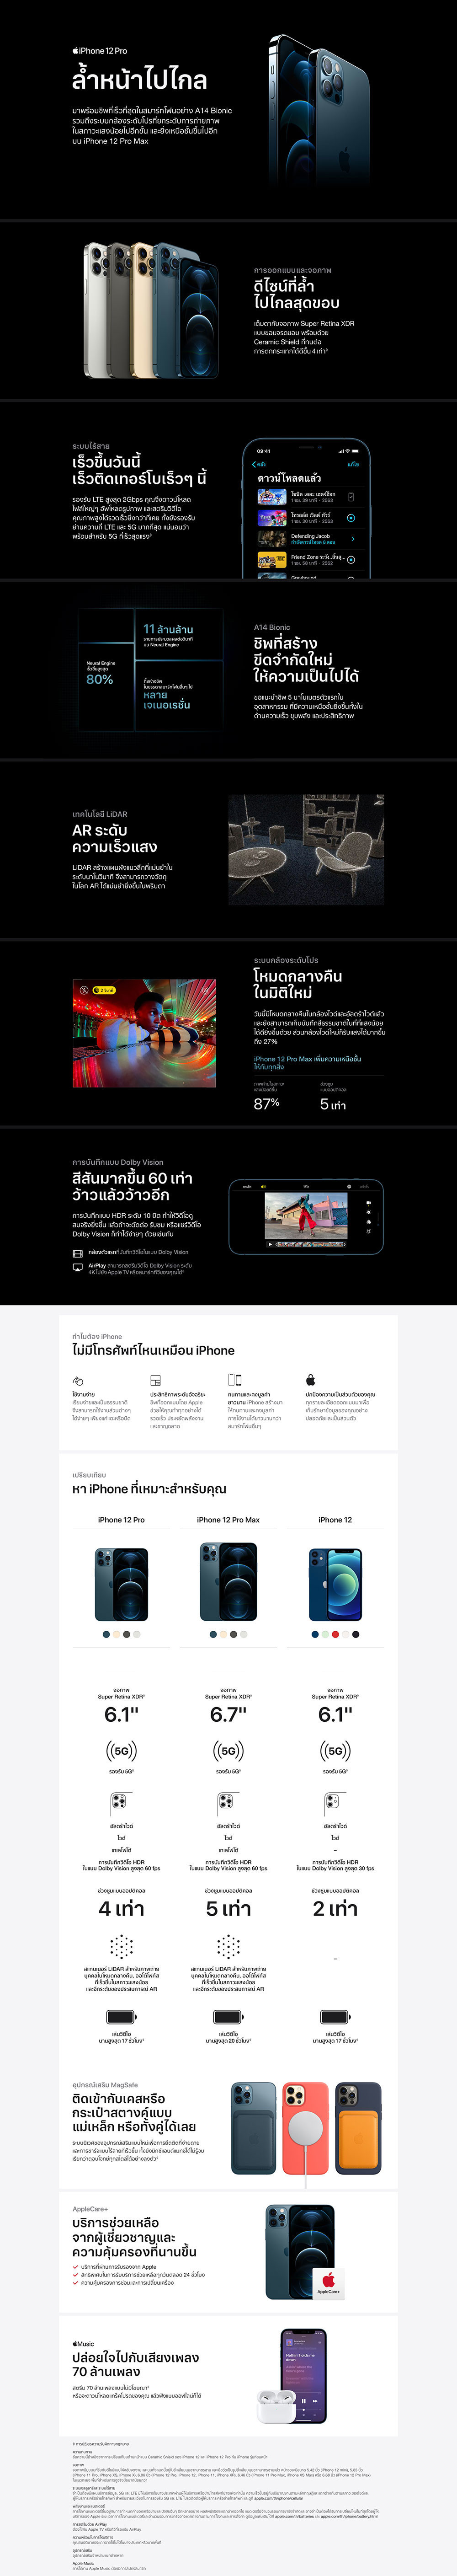 iphone-12-pro-long-page.jpg